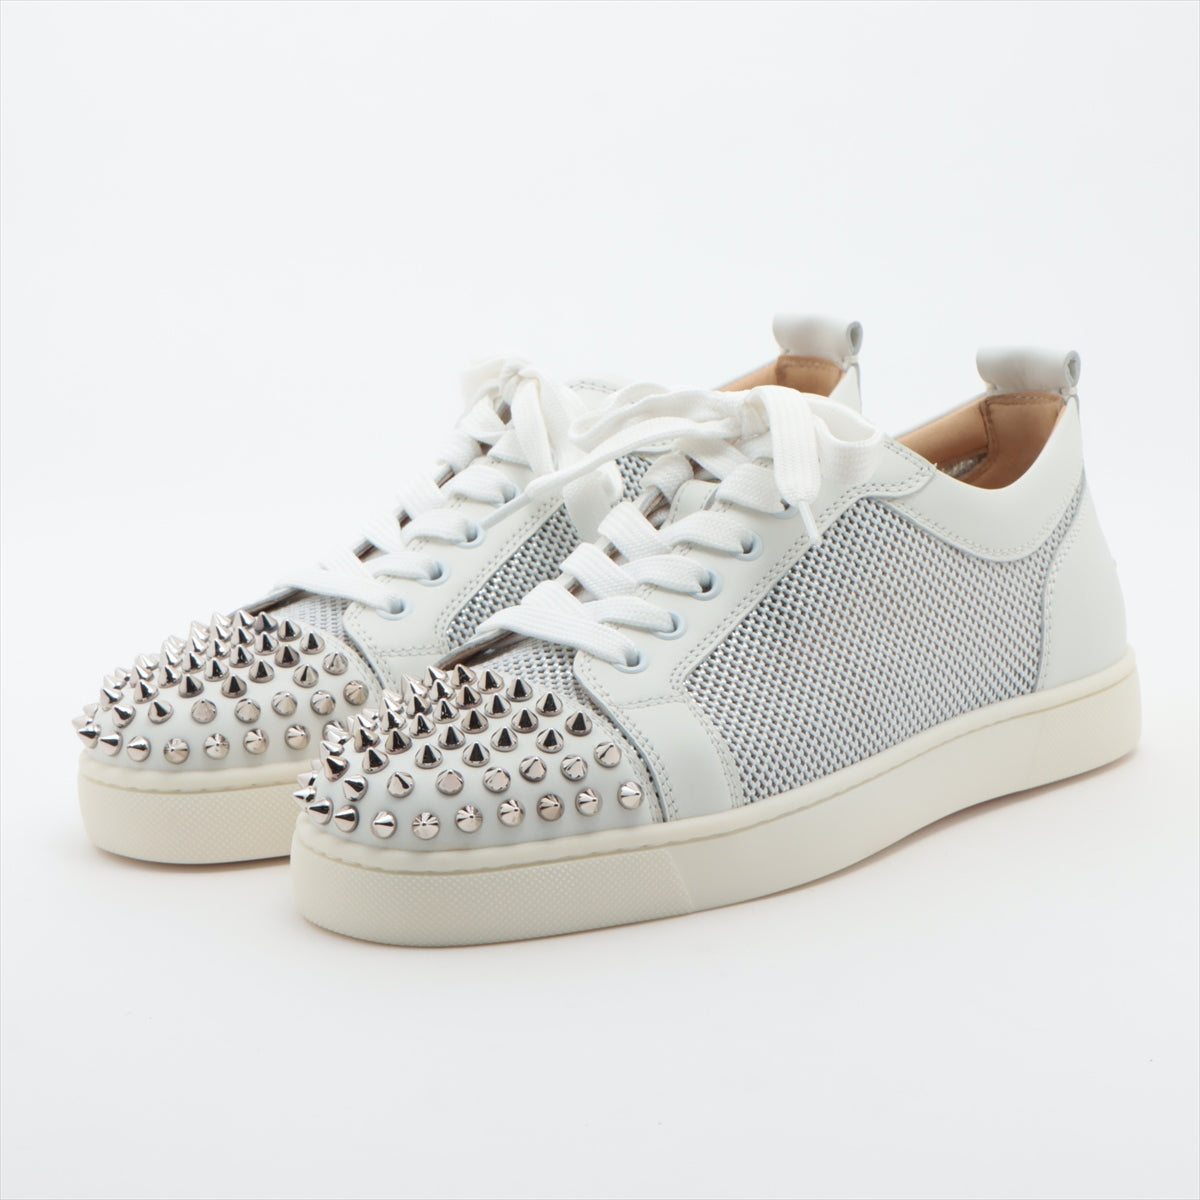 Christian Louboutin Leather Sneakers 39 1/2 Men's White AC LOUIS JUNIOR SP Spike Studs